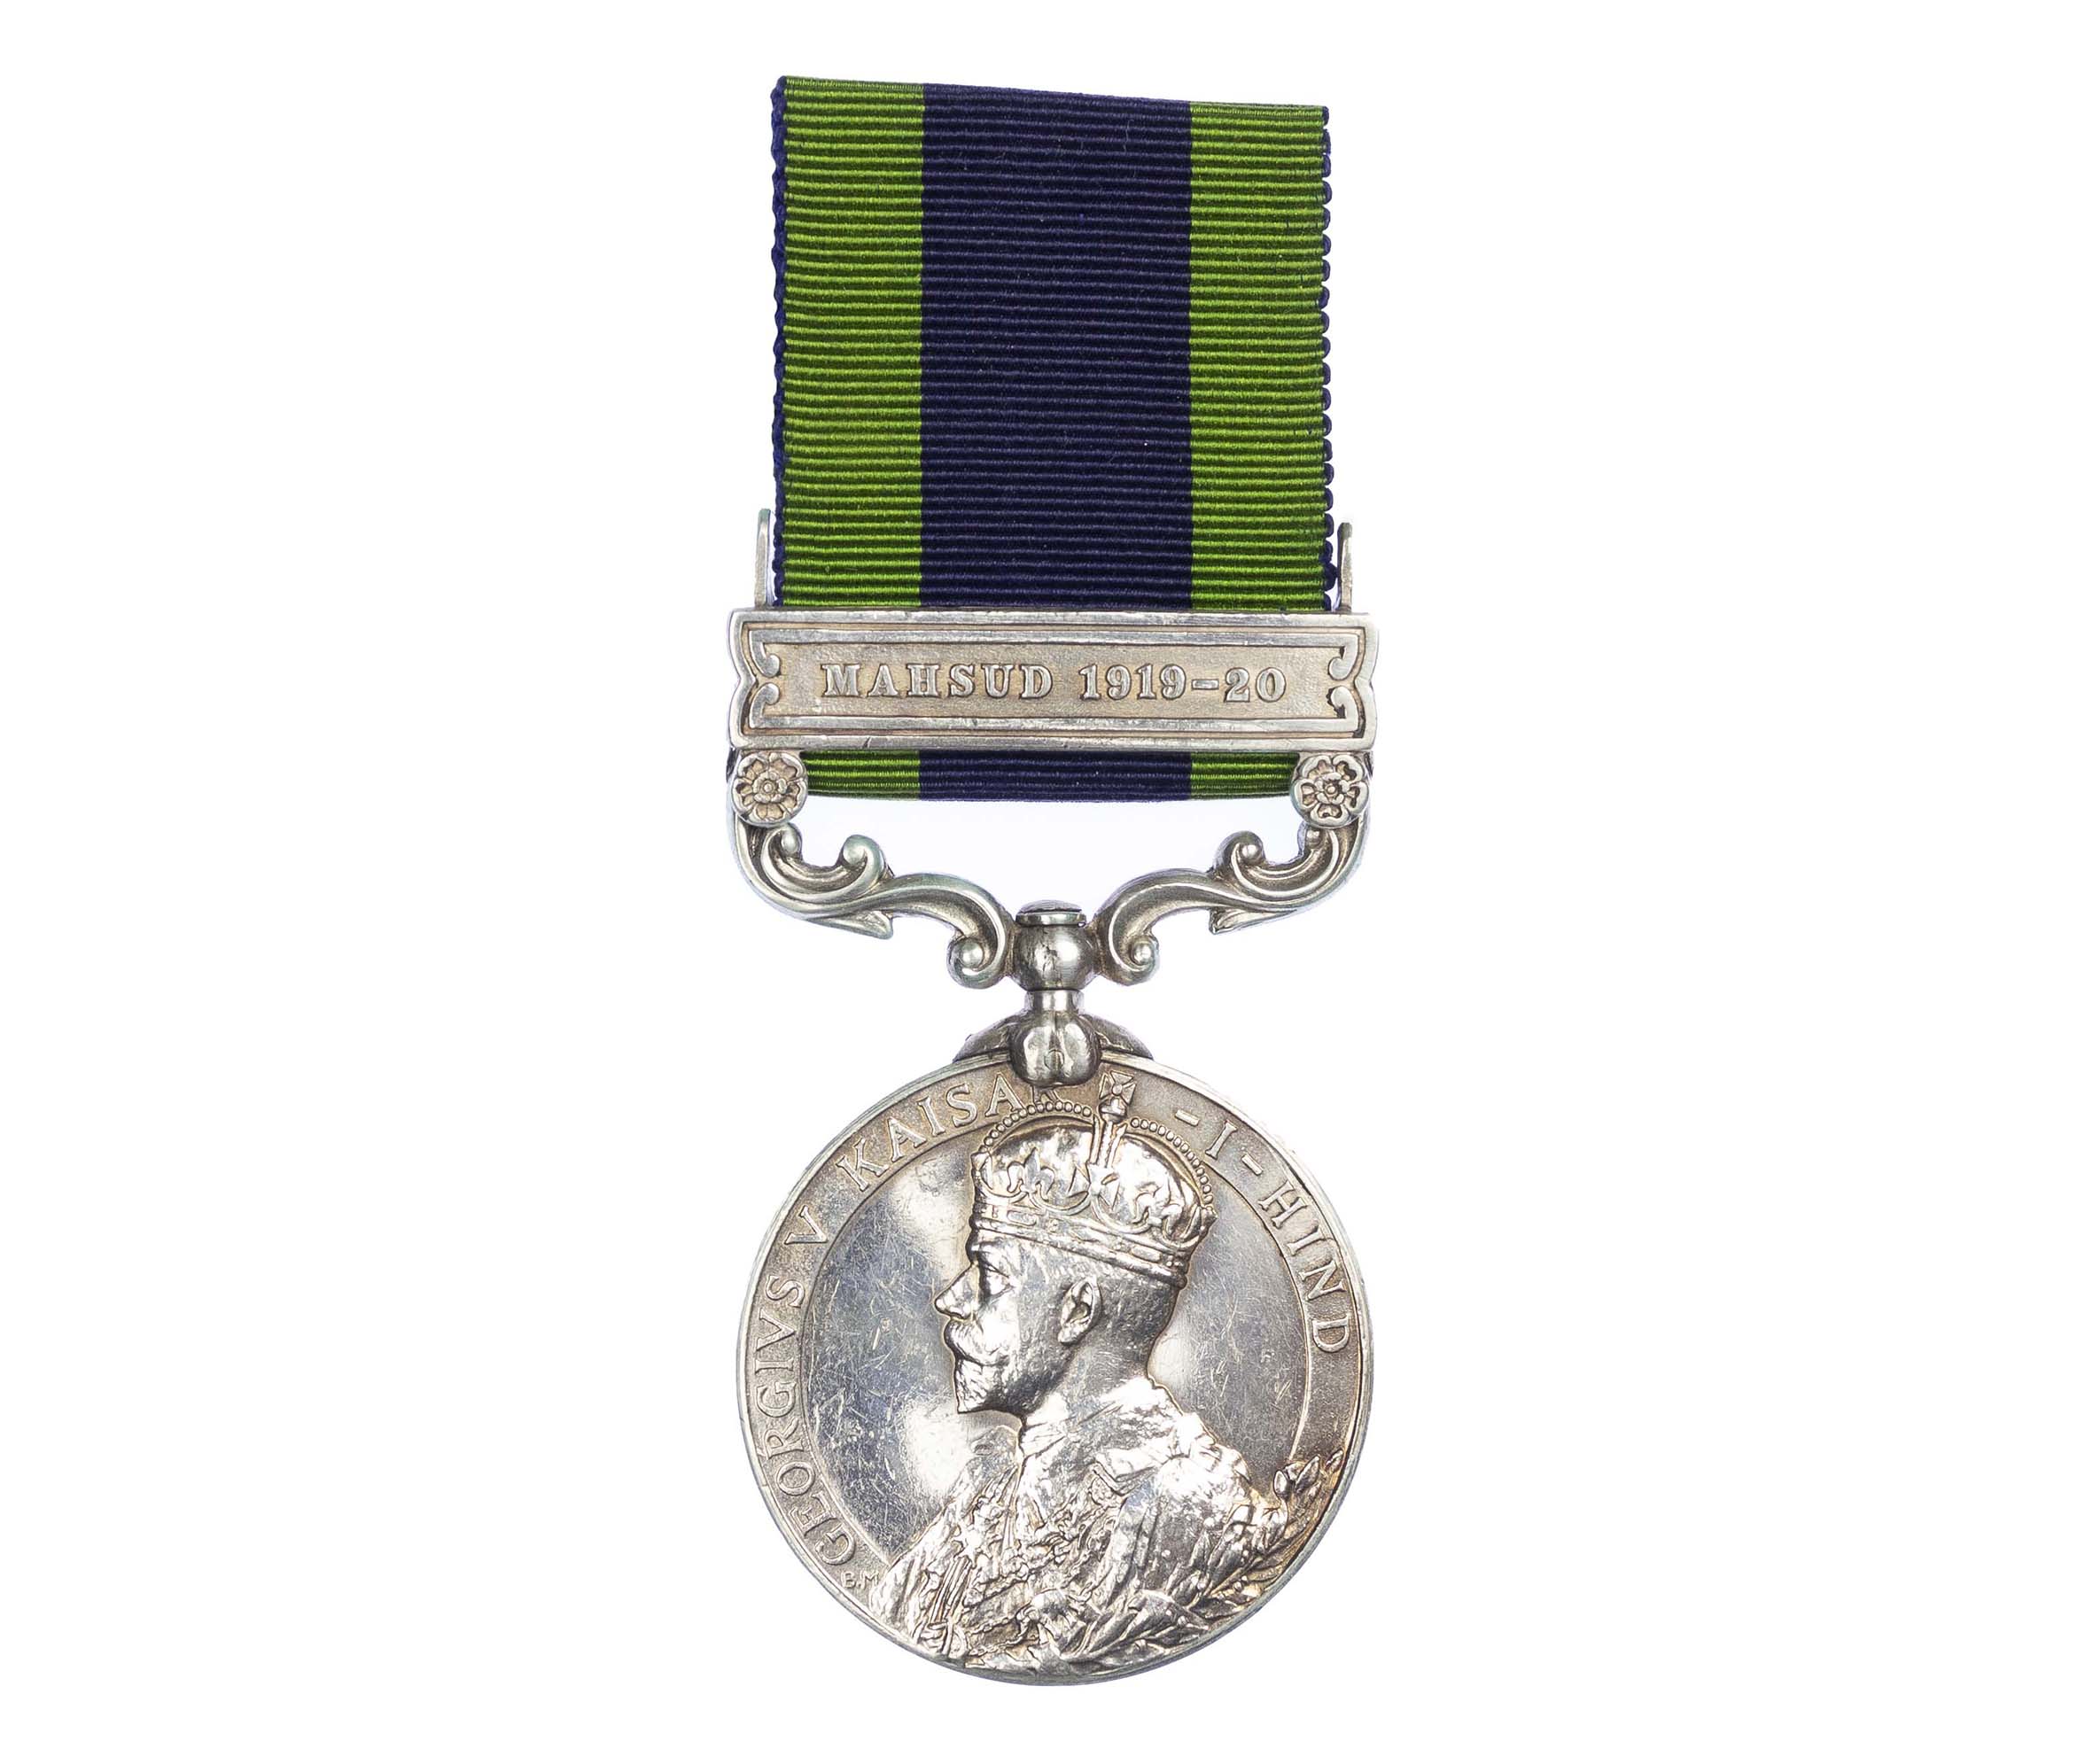 India General Service Medal 1908-1935, GVR, one clasp Mahsud 1919-20, to Sepoy Shamash Khan